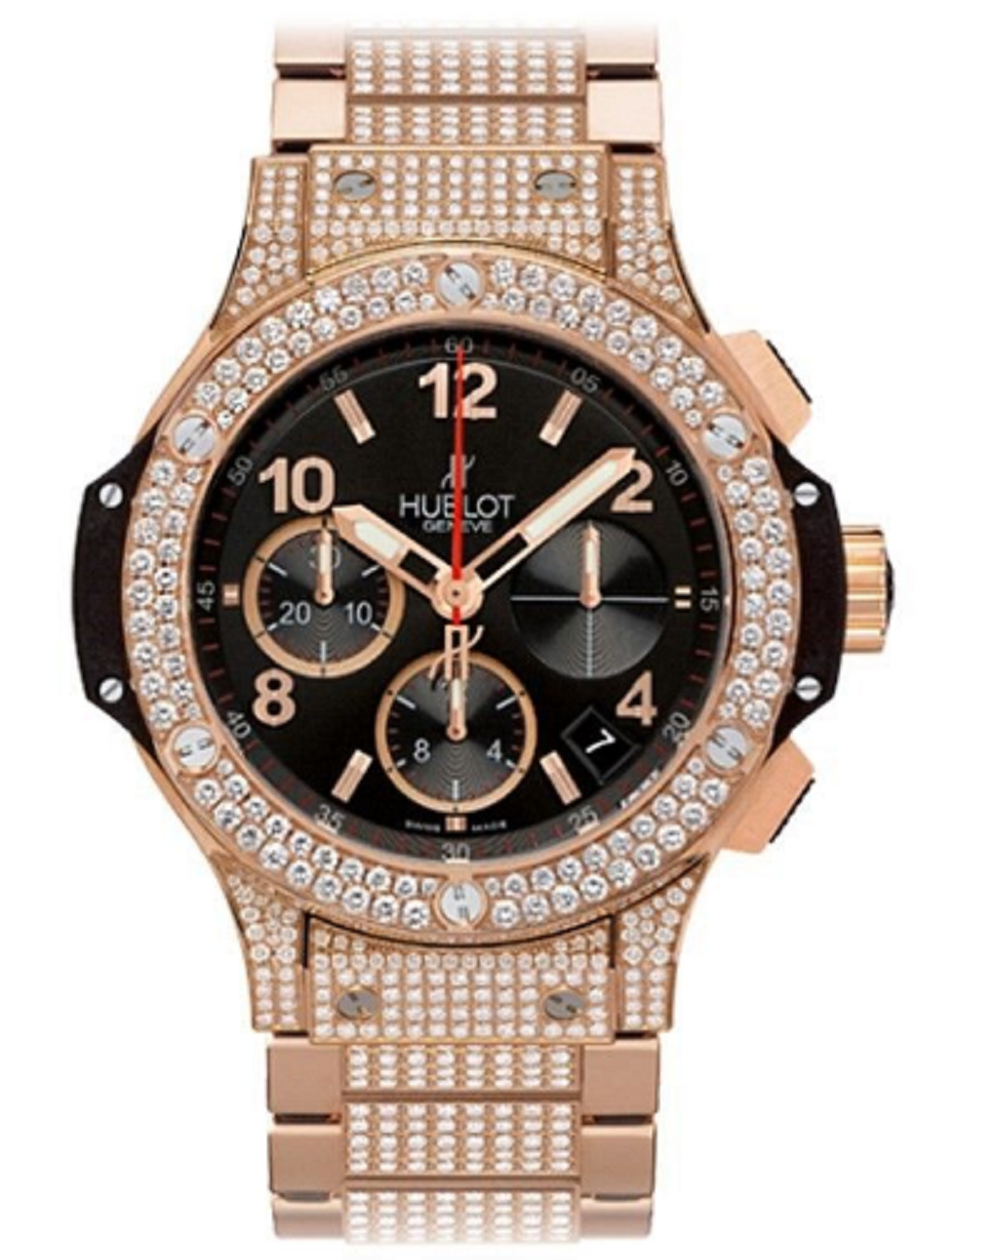 Big Bang 41mm in Rose Gold with Pave Diamond Bezel on Rose Gold Diamond Bracelet with Matt Black Dial